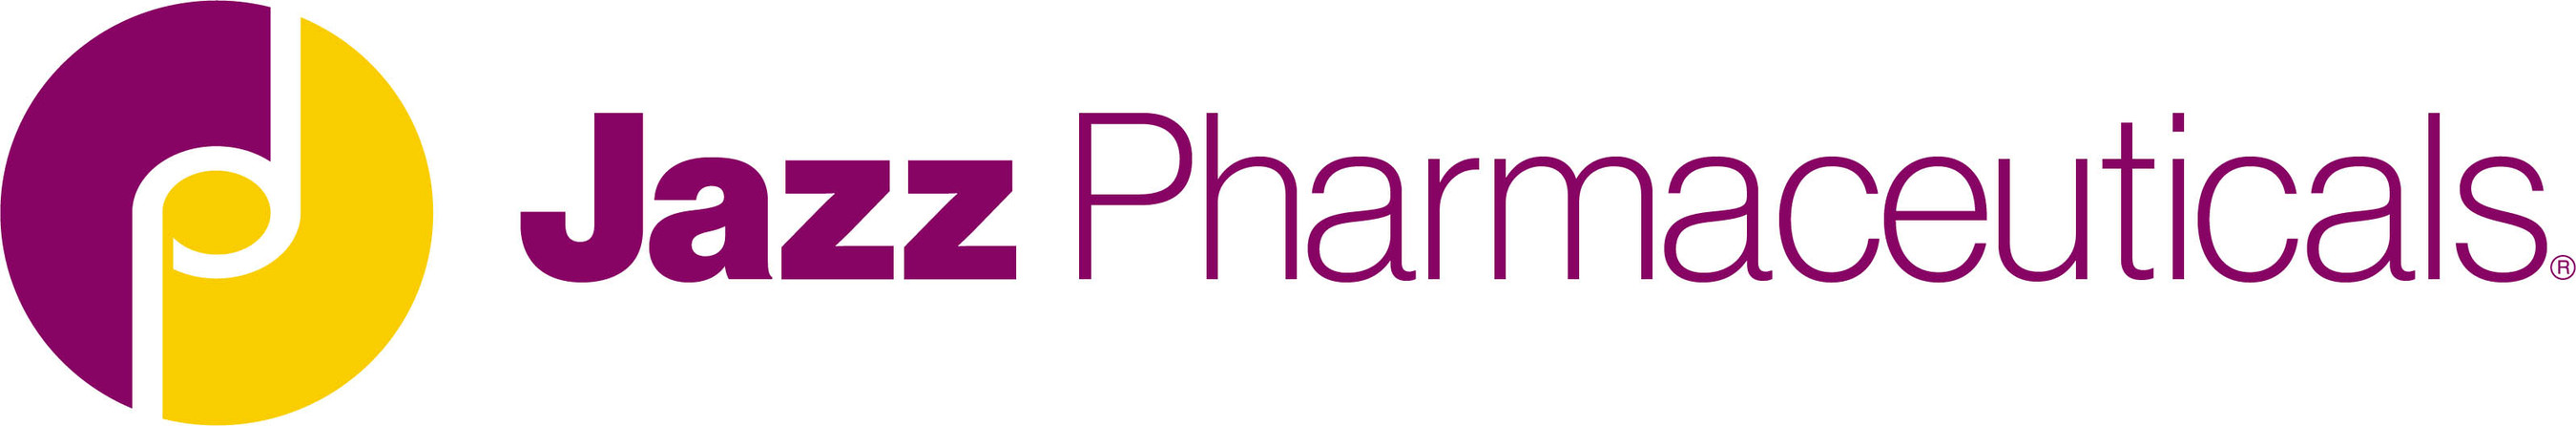 Jazz Pharmaceuticals Announces Participation at Two Upcoming Virtual Investor Conferences